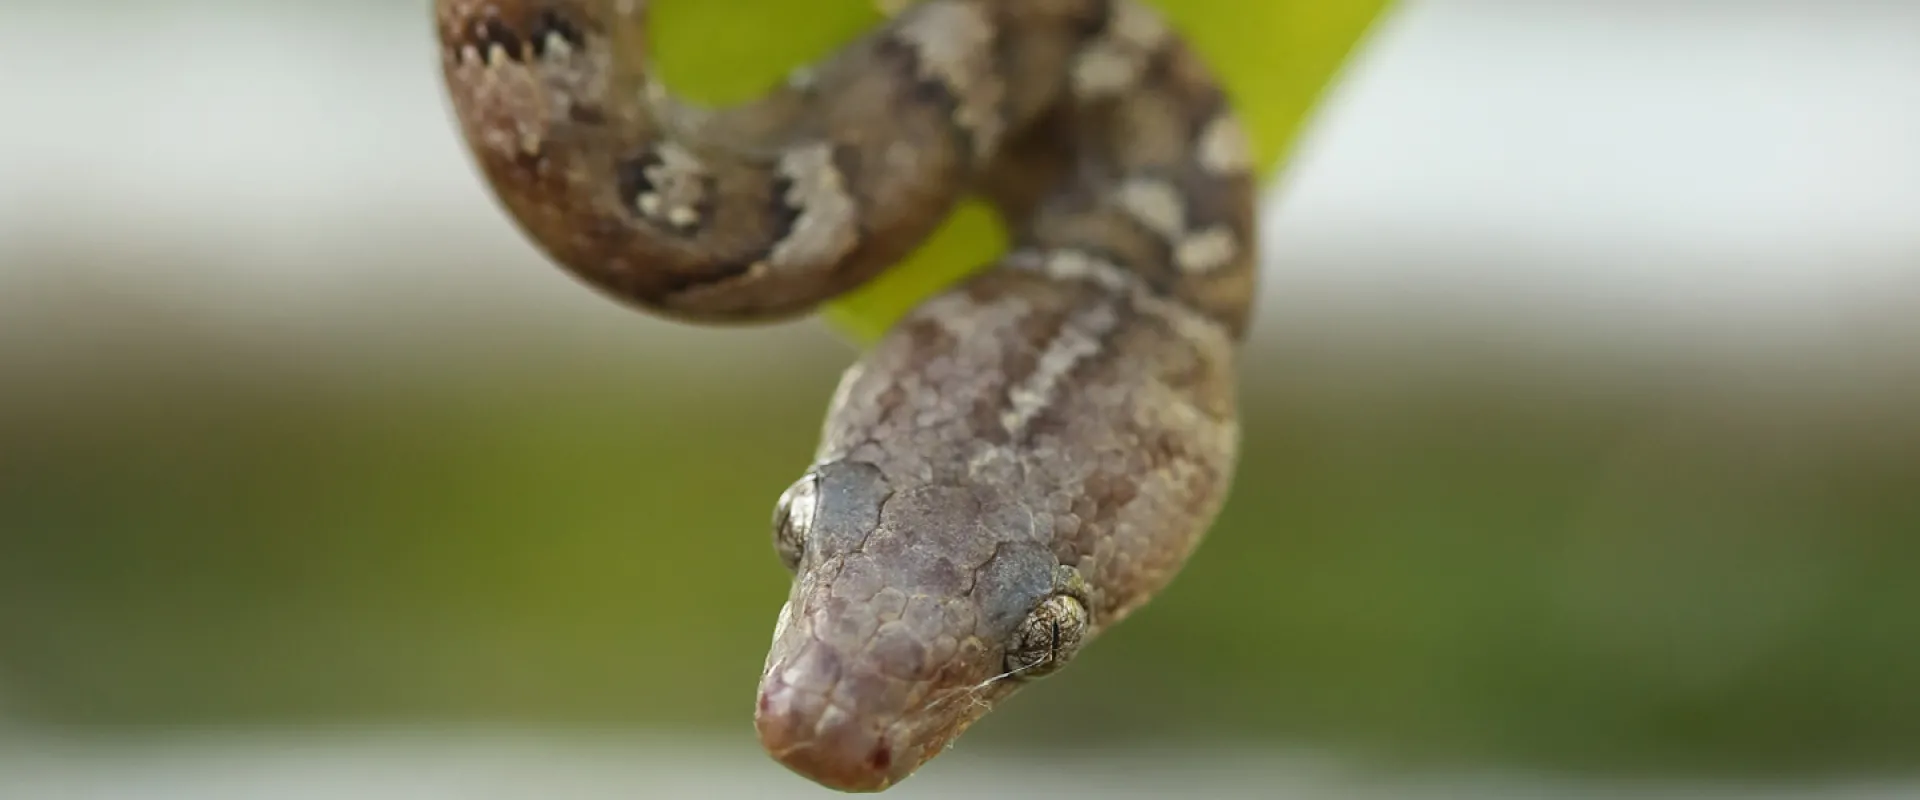 Cold-Blooded Conservation: Saving Snakes - One Island at a Time